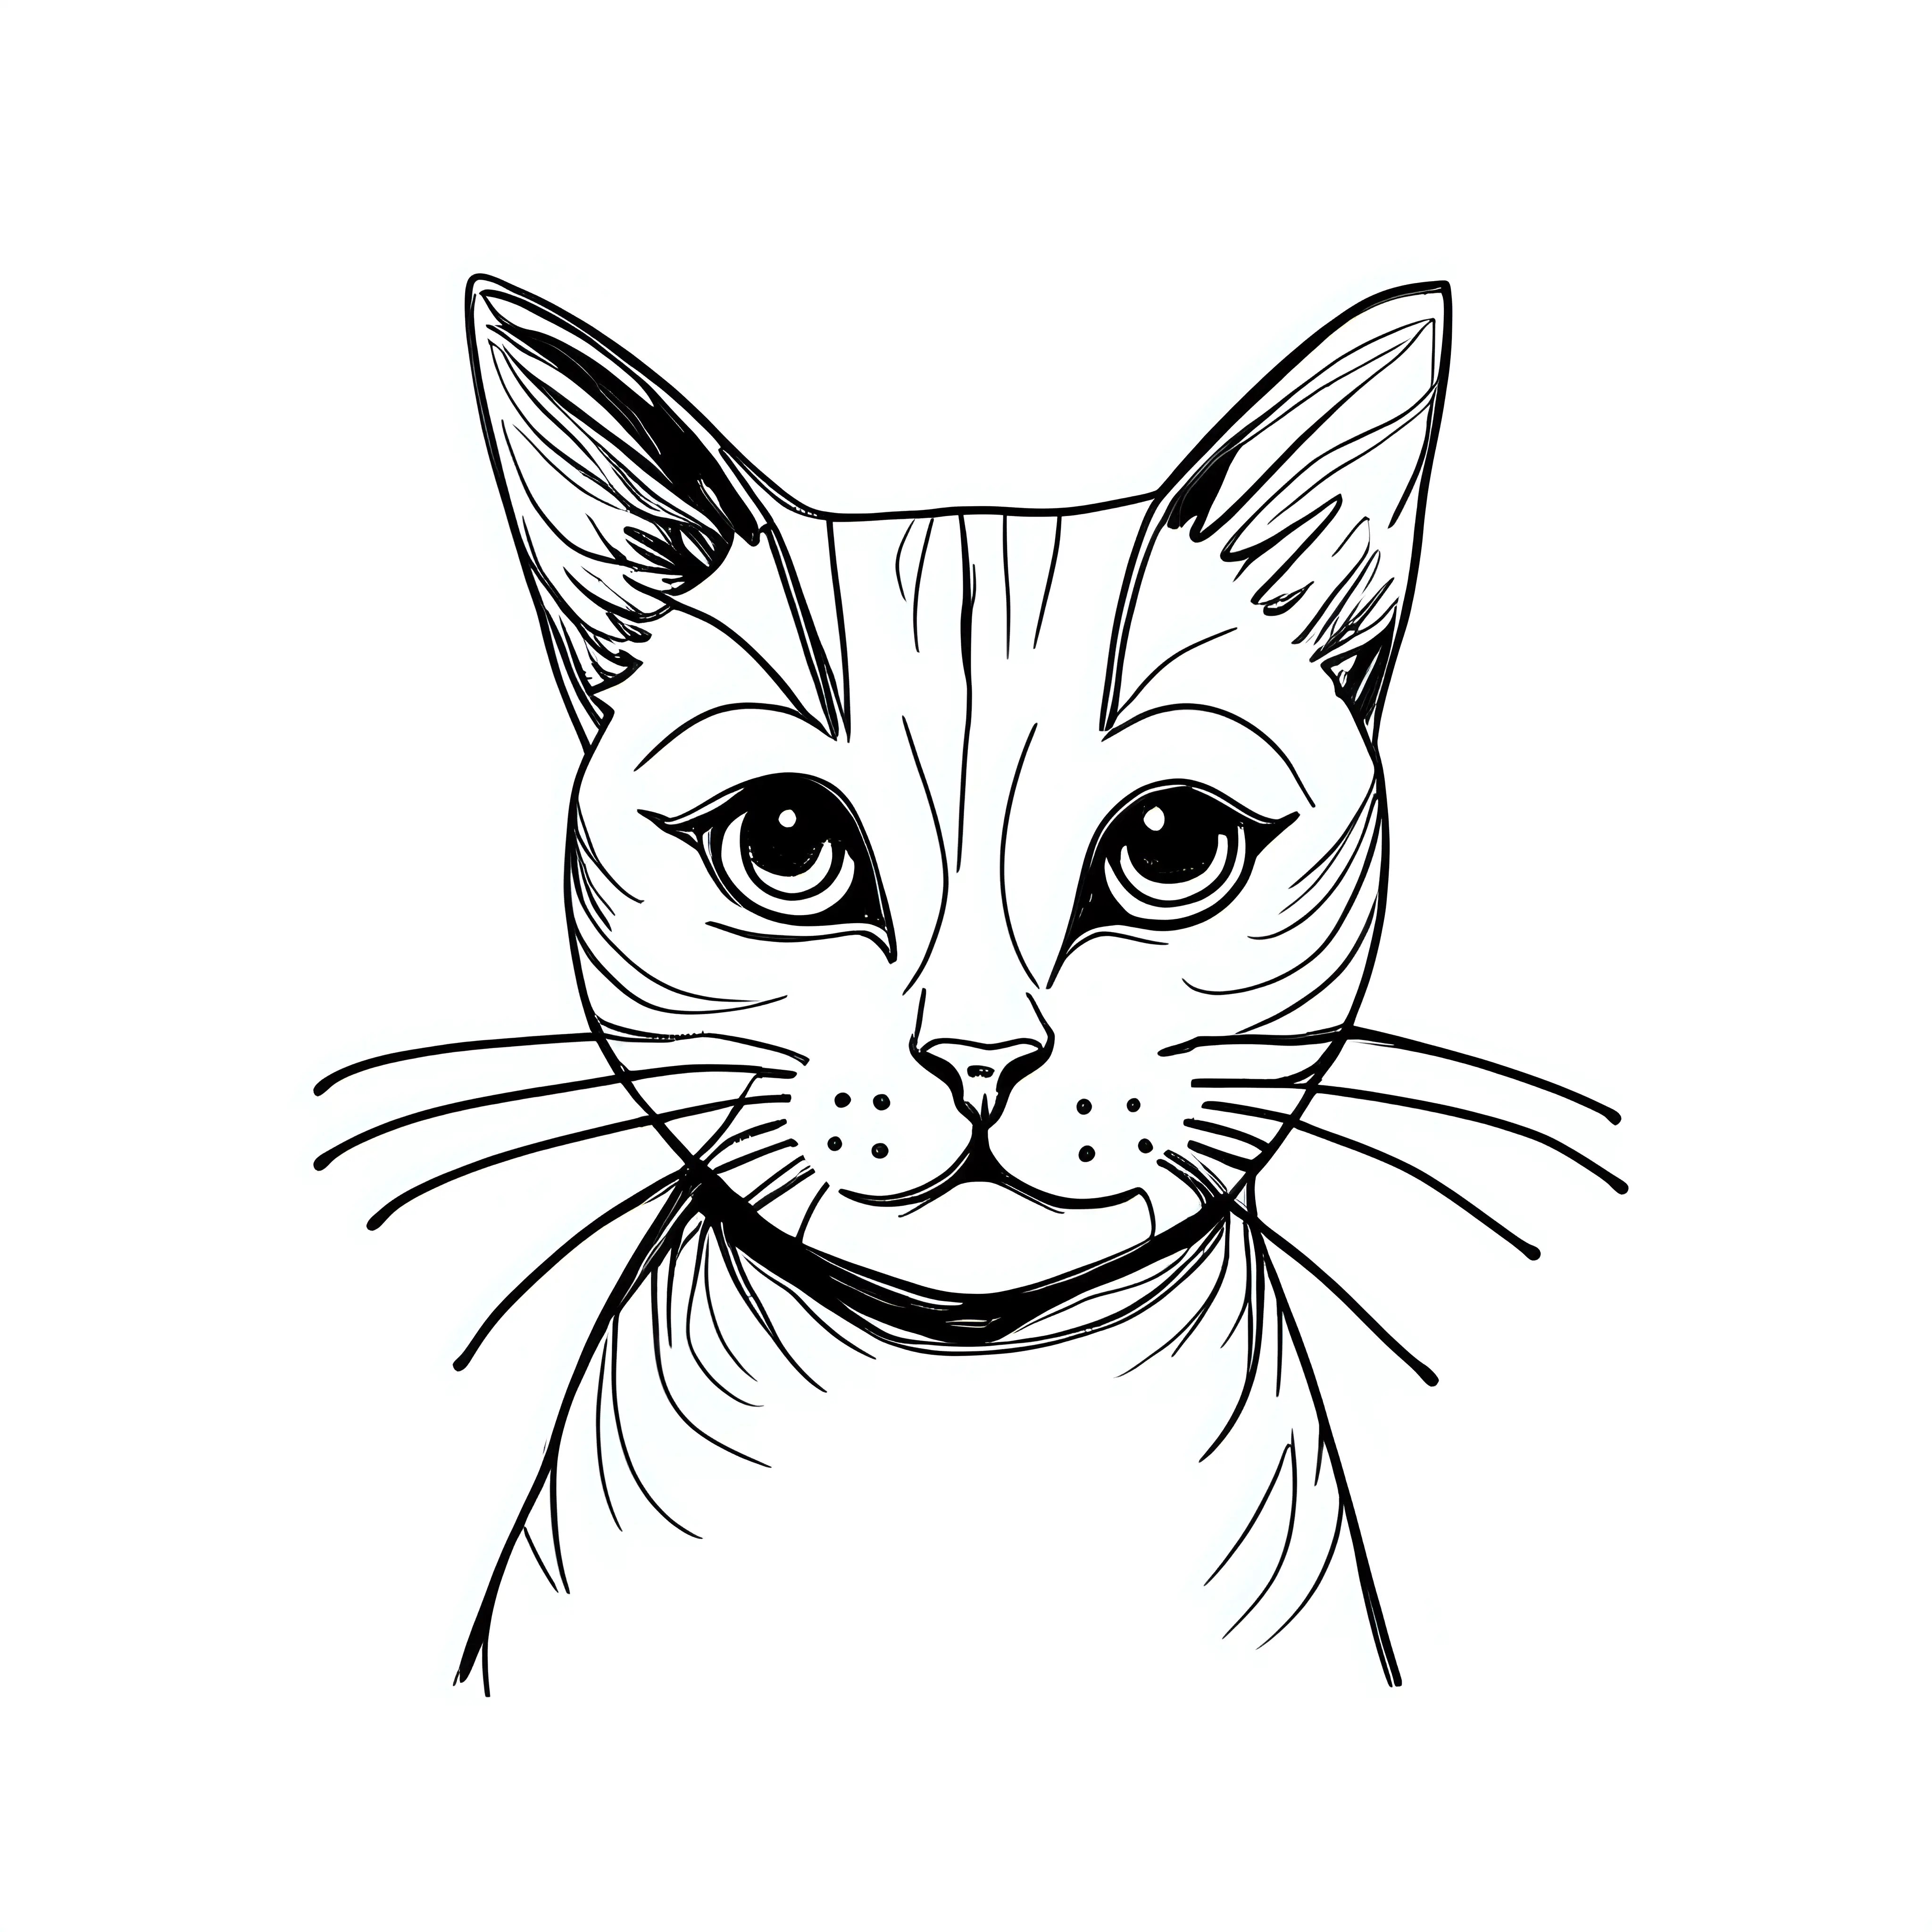 minimalist, thin line child drawing ink drawing, of a cat only black and white colors, against a pure white background, illustration, poster